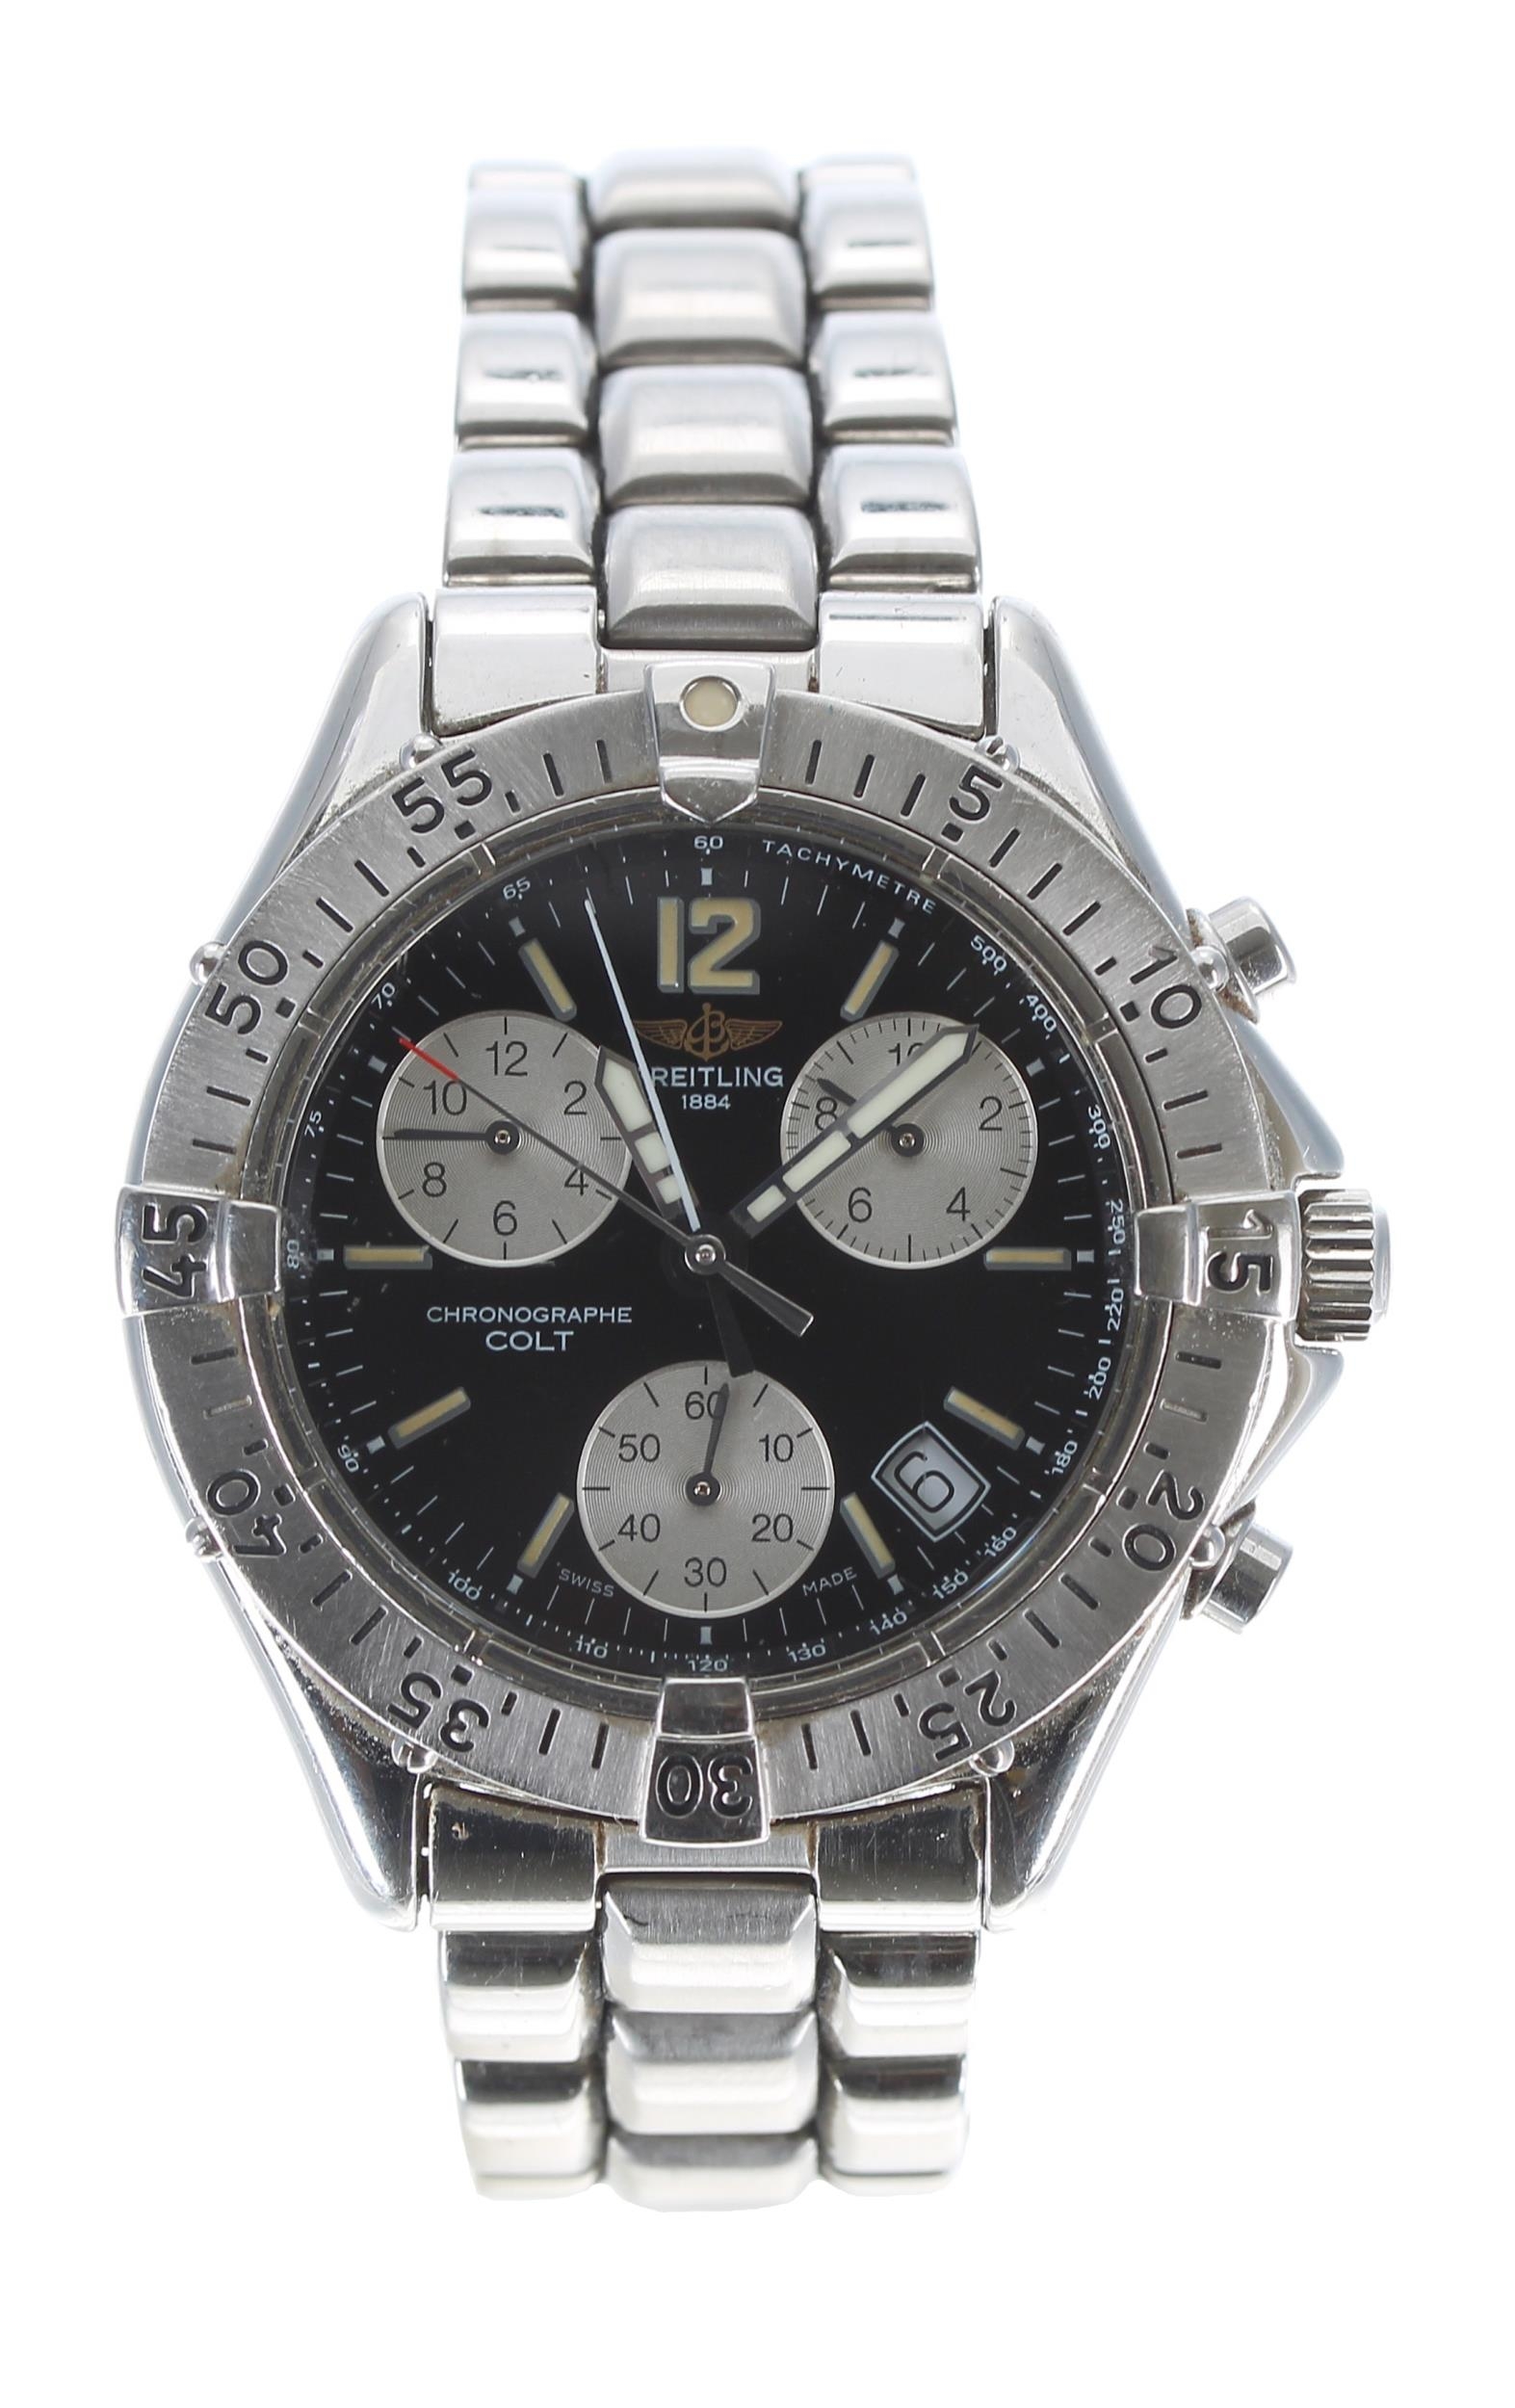 Breitling Colt Chronograph stainless steel gentleman's wristwatch, reference no. A53035, serial